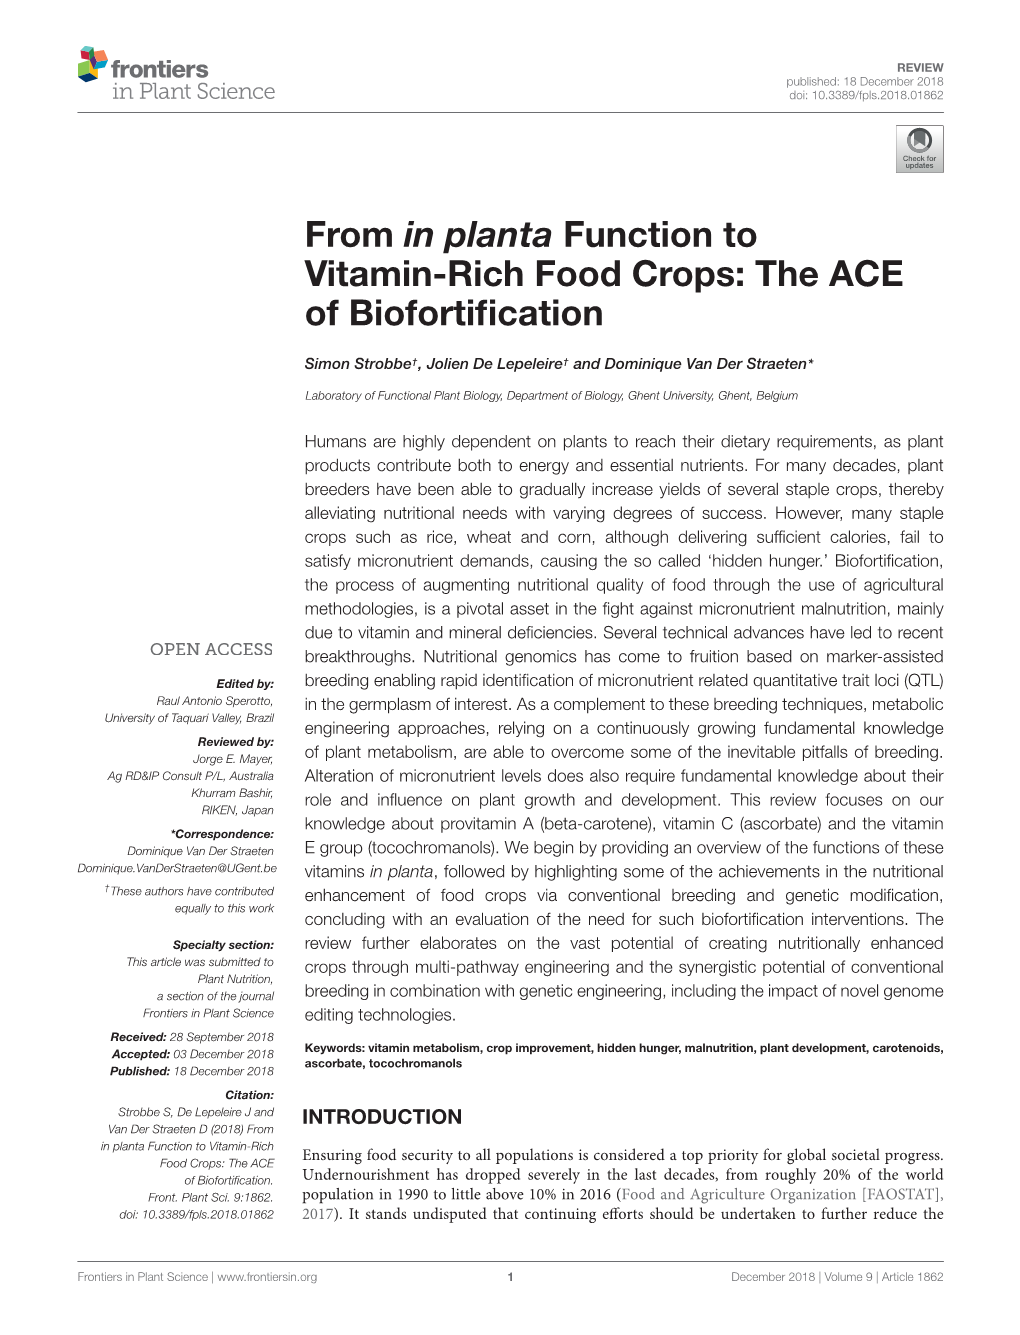 From in Planta Function to Vitamin-Rich Food Crops: the ACE of Biofortiﬁcation